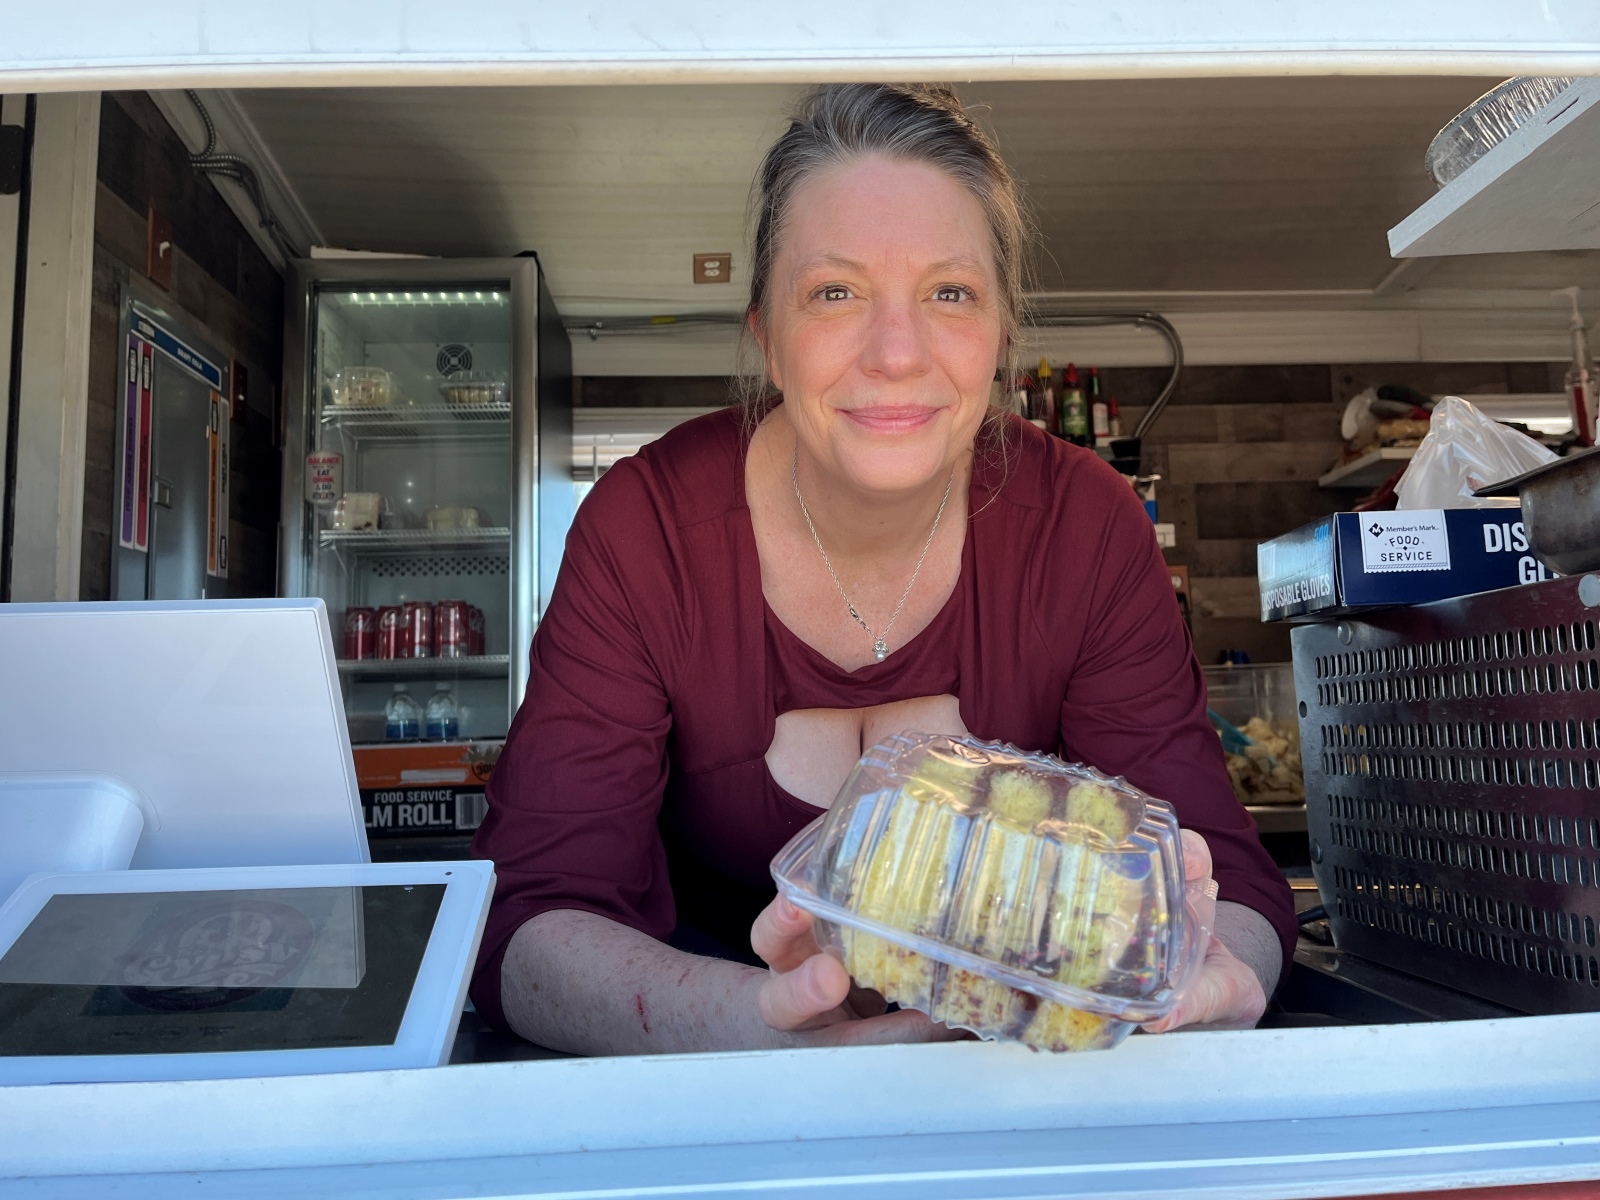 Stephanie Wigger, wearing a red shirt and holding a slice of cake in a plastic container, leans out of the window of The Gypsy food truck.